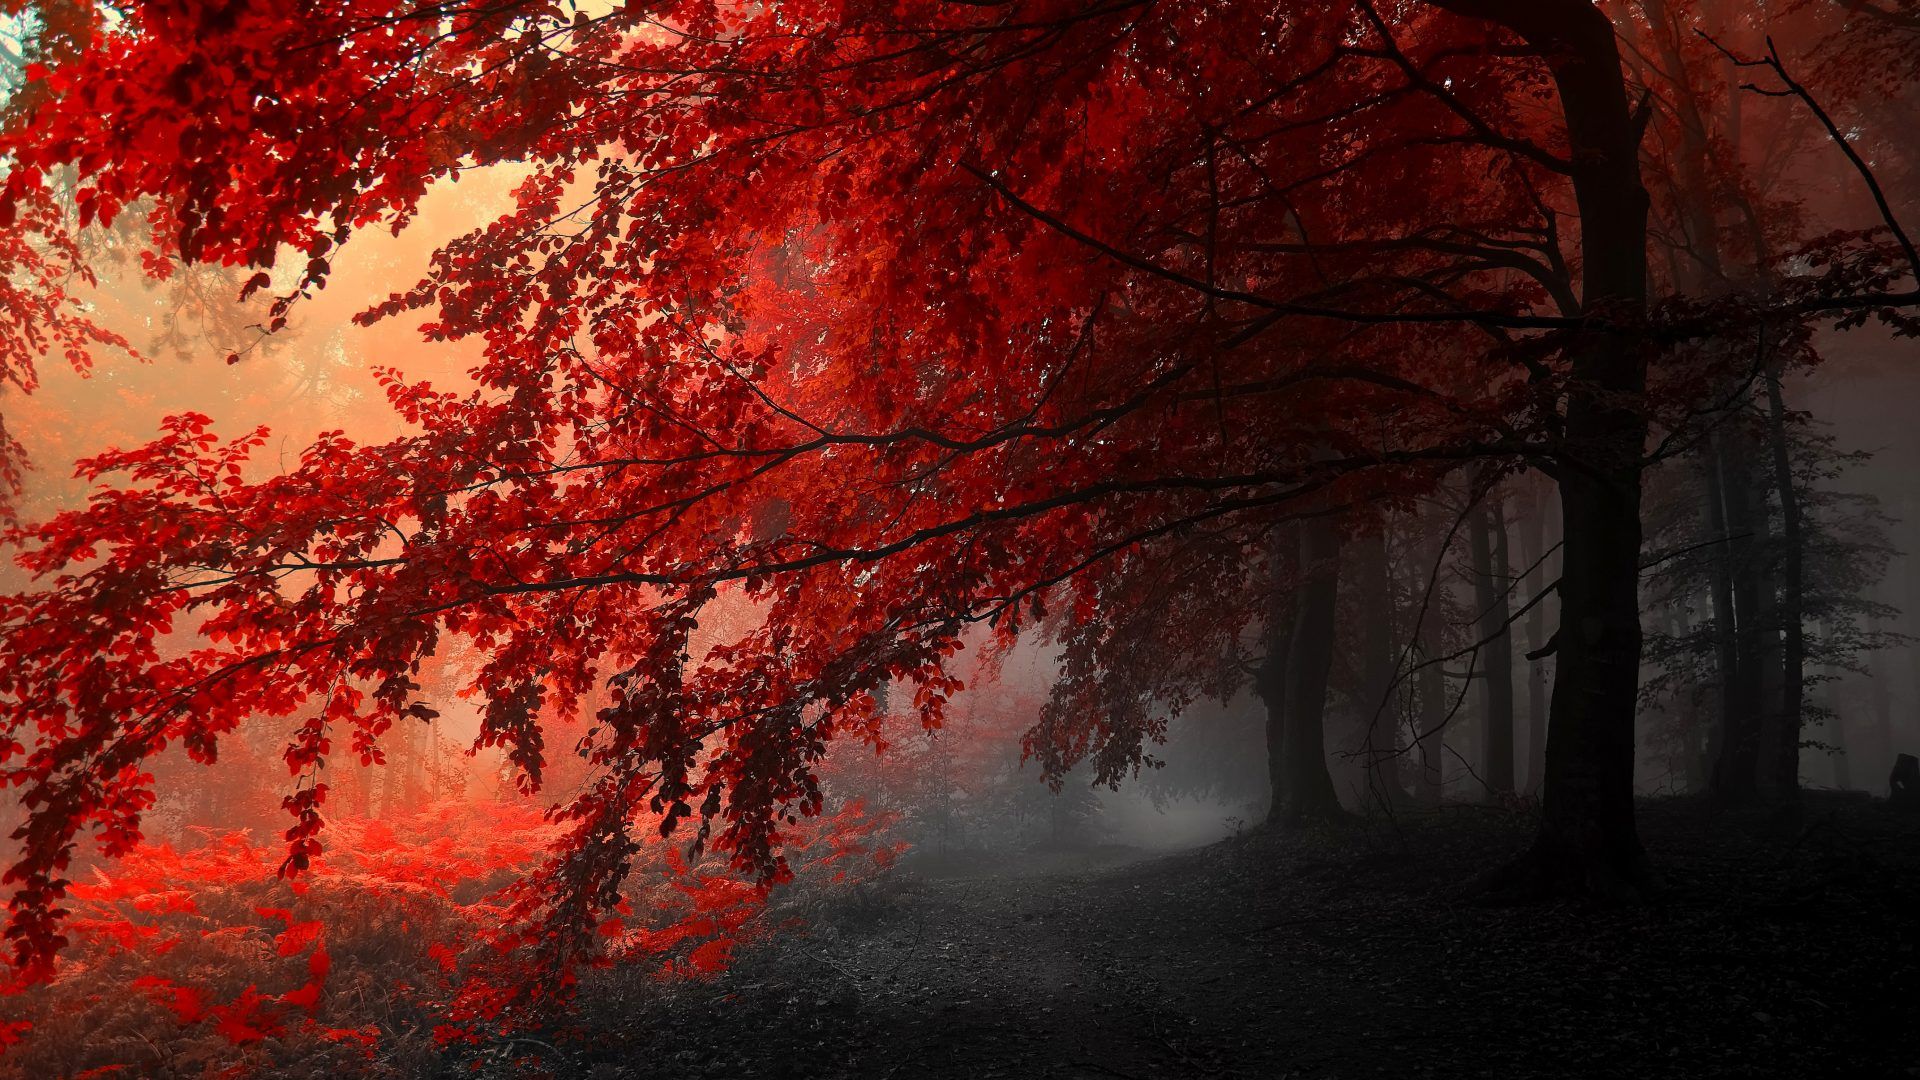 Forests: Autumn Splendor Peaceful Path Red Misty Forest Pathway Fog Mist Road Leaves Fall Woods Beauty Walk. Forest wallpaper, Tree HD wallpaper, Nature wallpaper